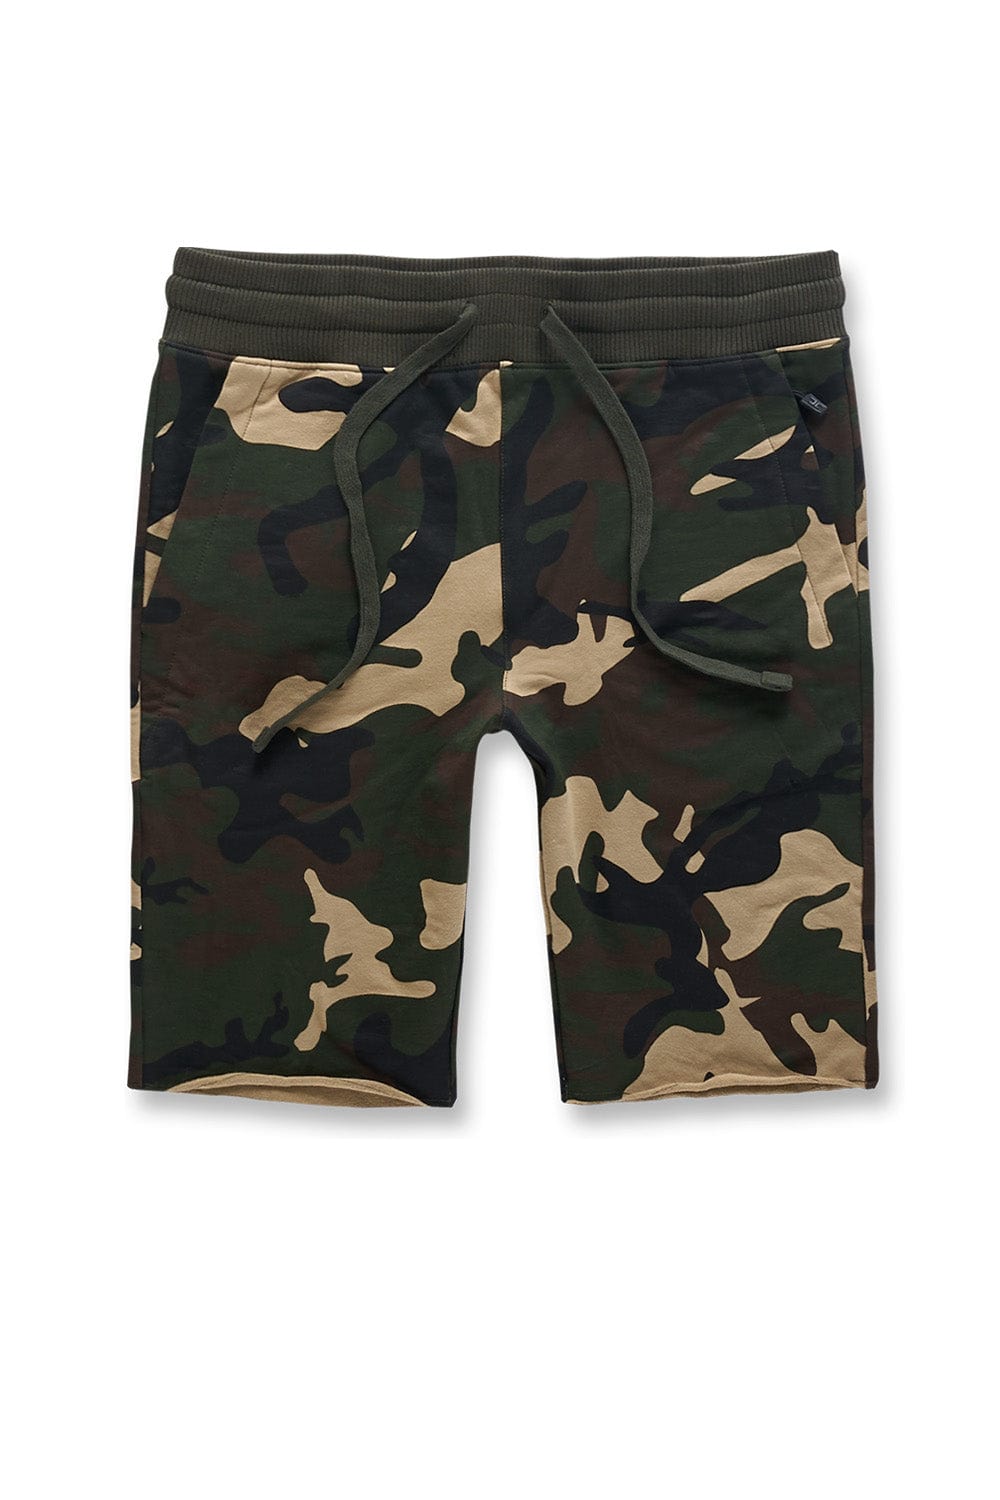 JC Kids Kids Palma French Terry Shorts (Name Your Price) Woodland / 2